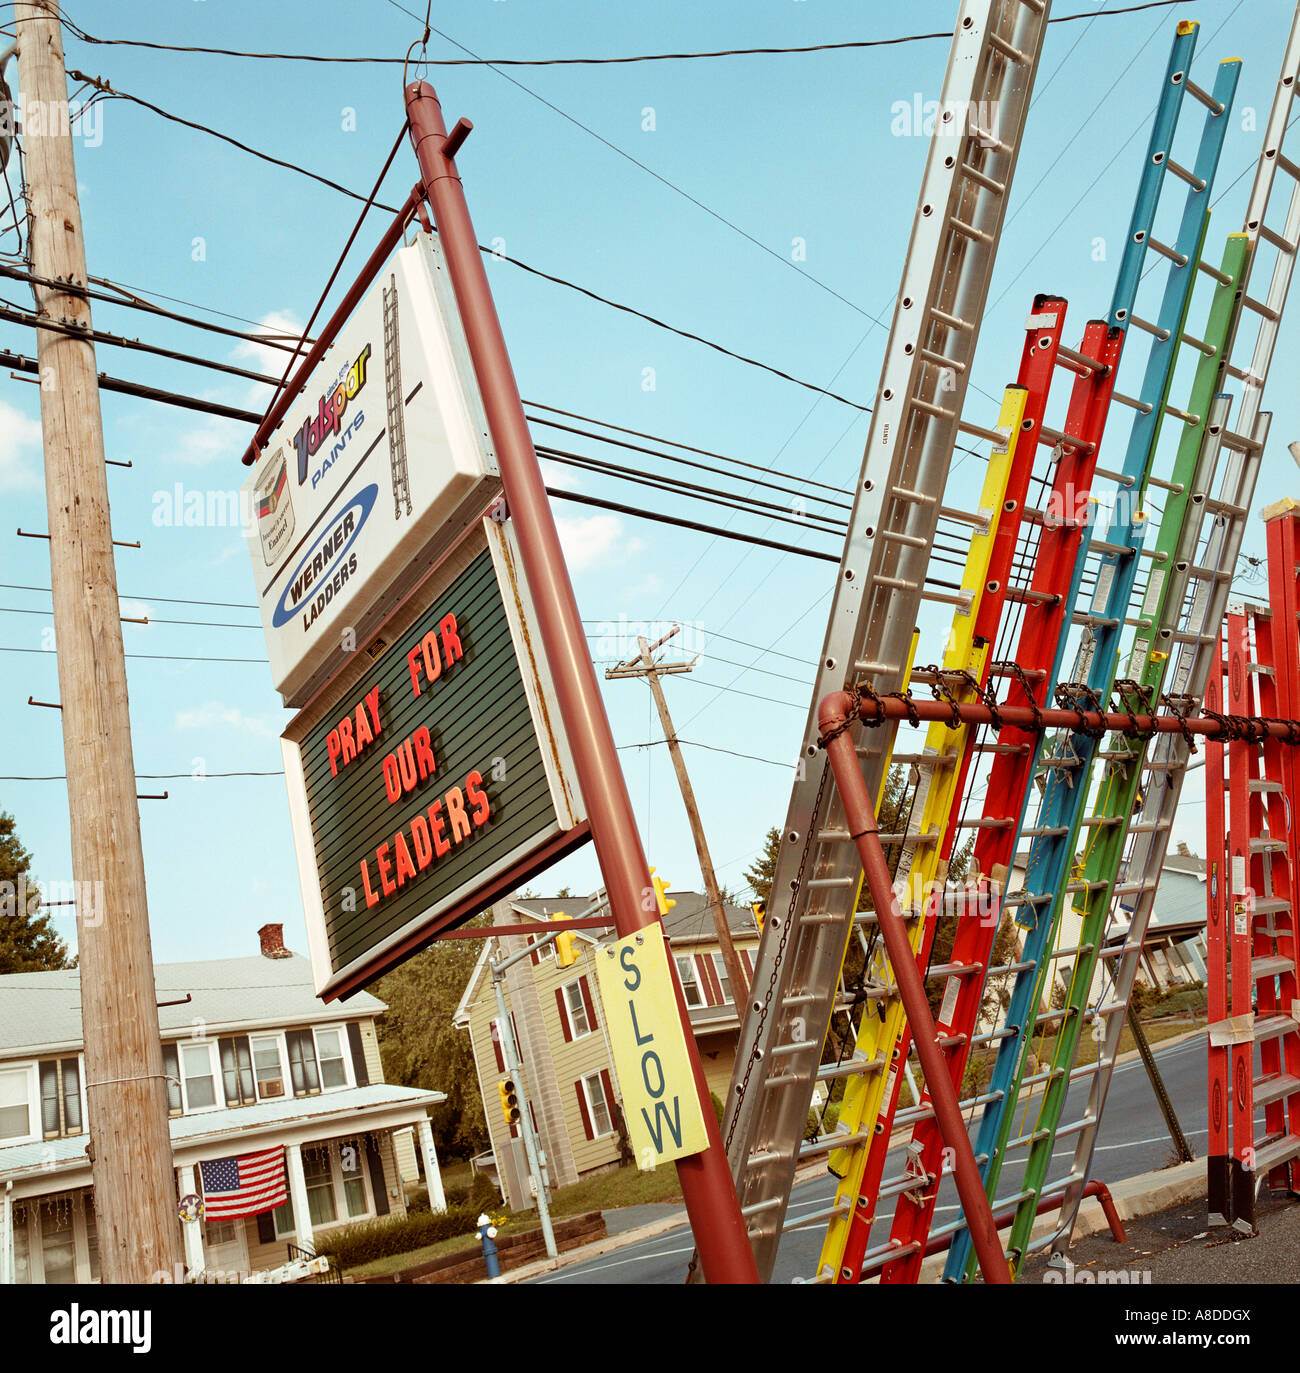 Ladders and display board on a rural Pennsylvanian town days after 9 11 attacks in New York USA Stock Photo